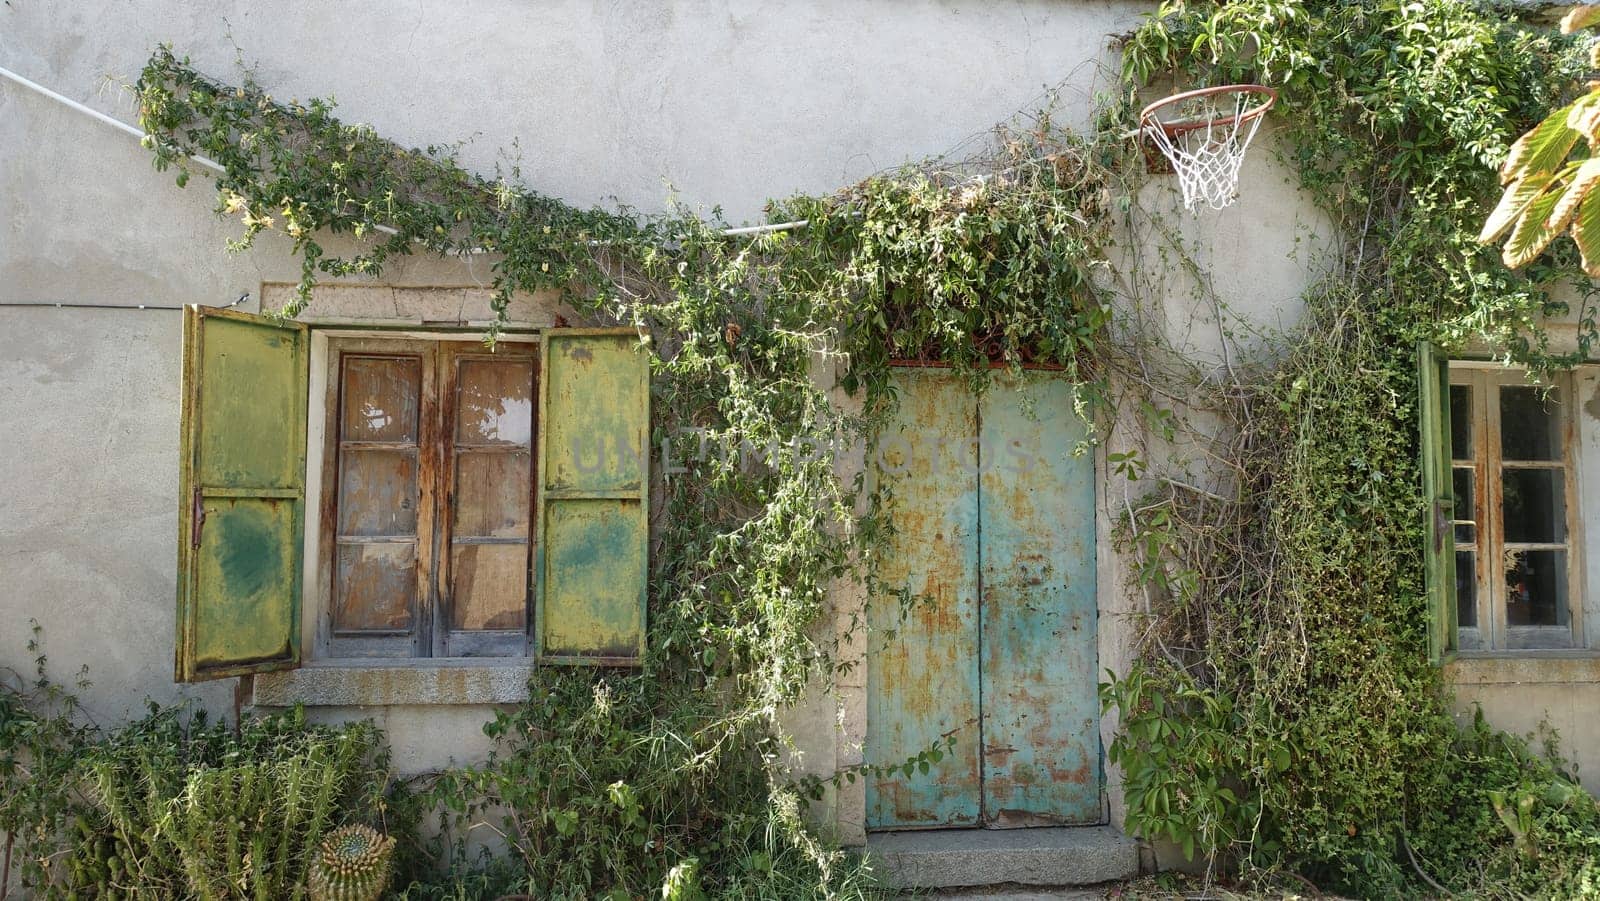 The facade of an old country house with an old basketball hoop on the wall by Jamaladeen